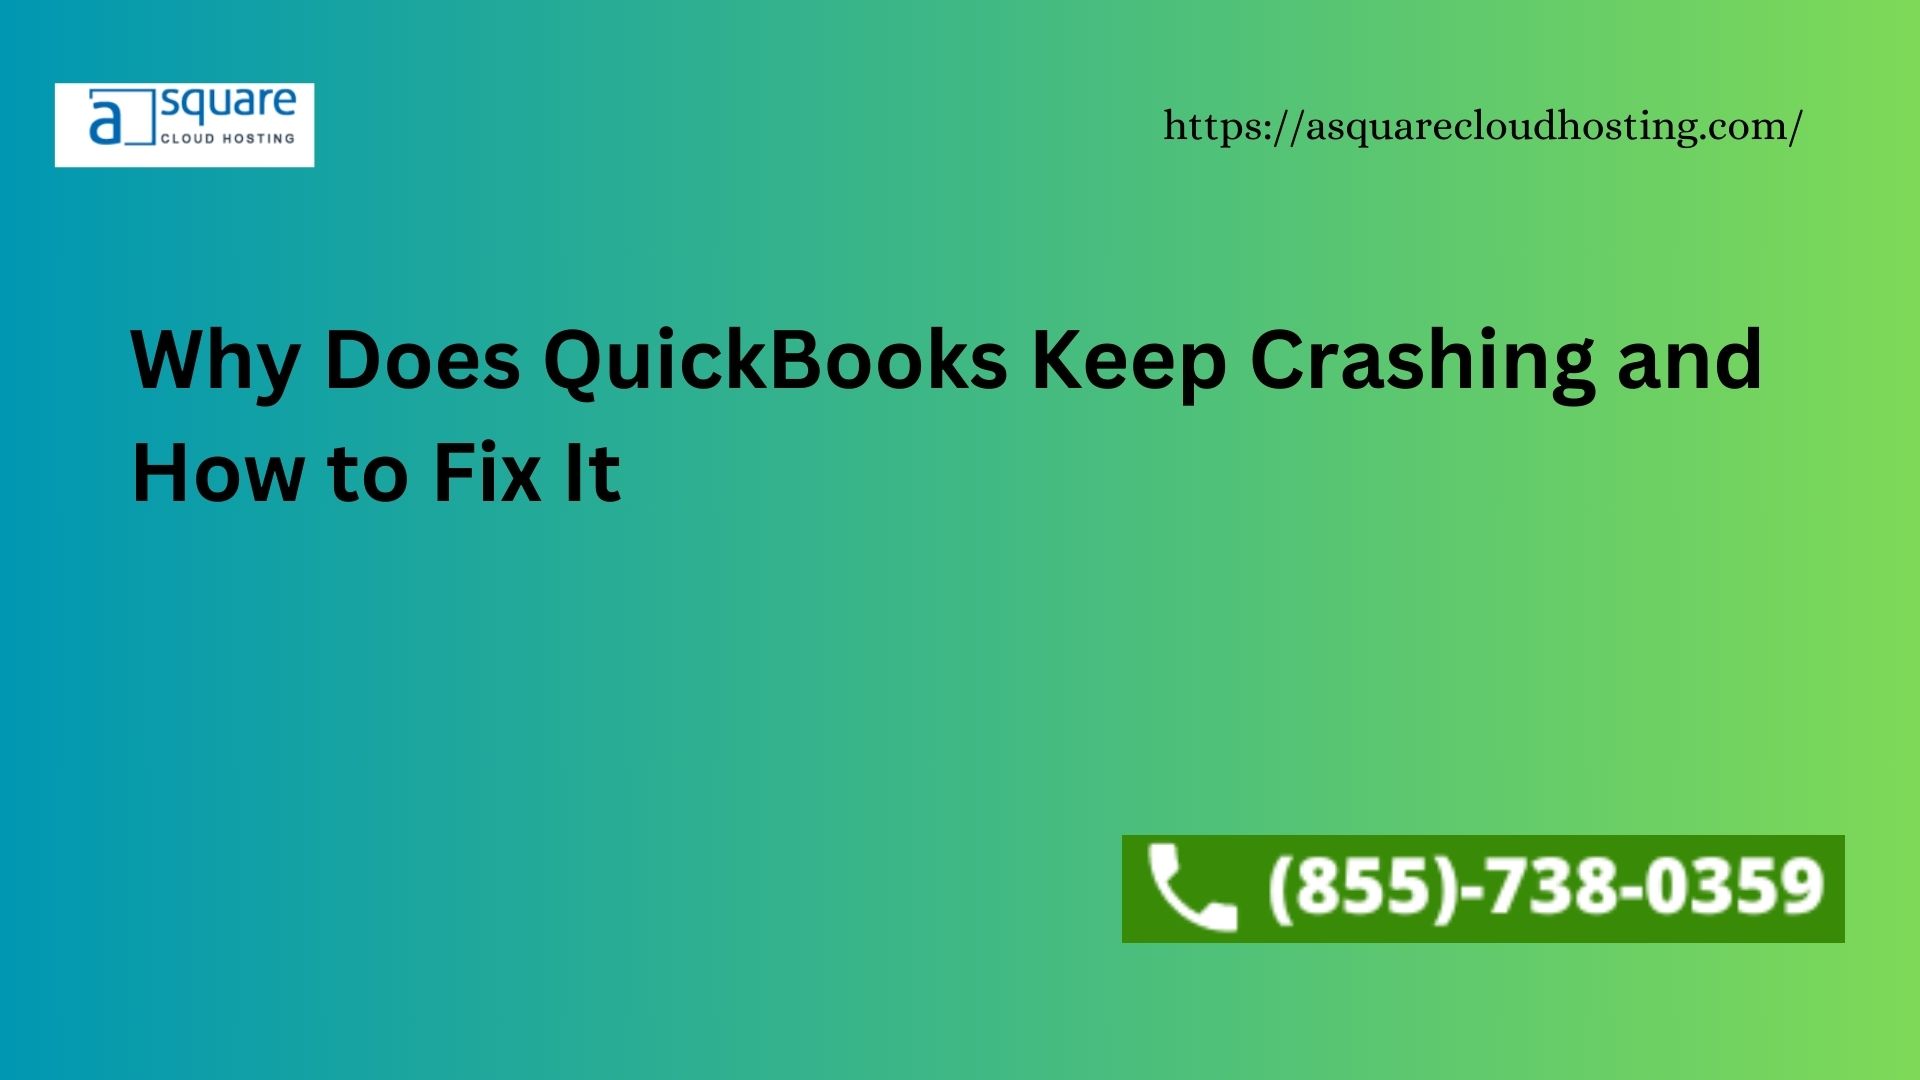 Why Does QuickBooks Keep Crashing and How to Fix It